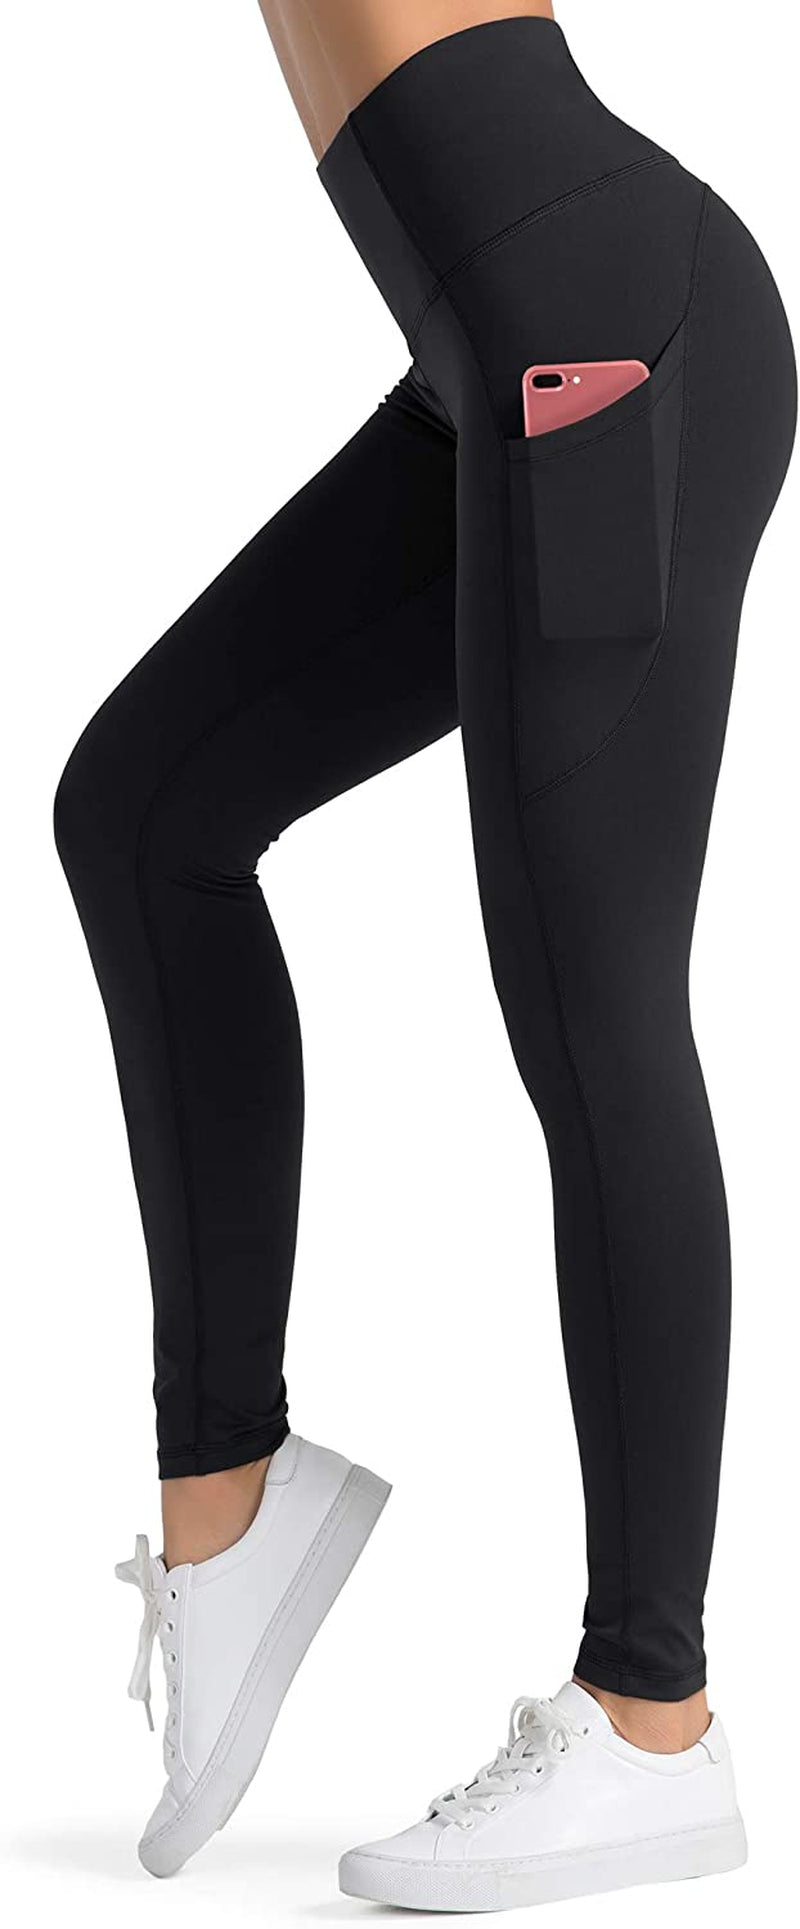 High Waist Yoga Pants for Women with Pockets Stretch Running